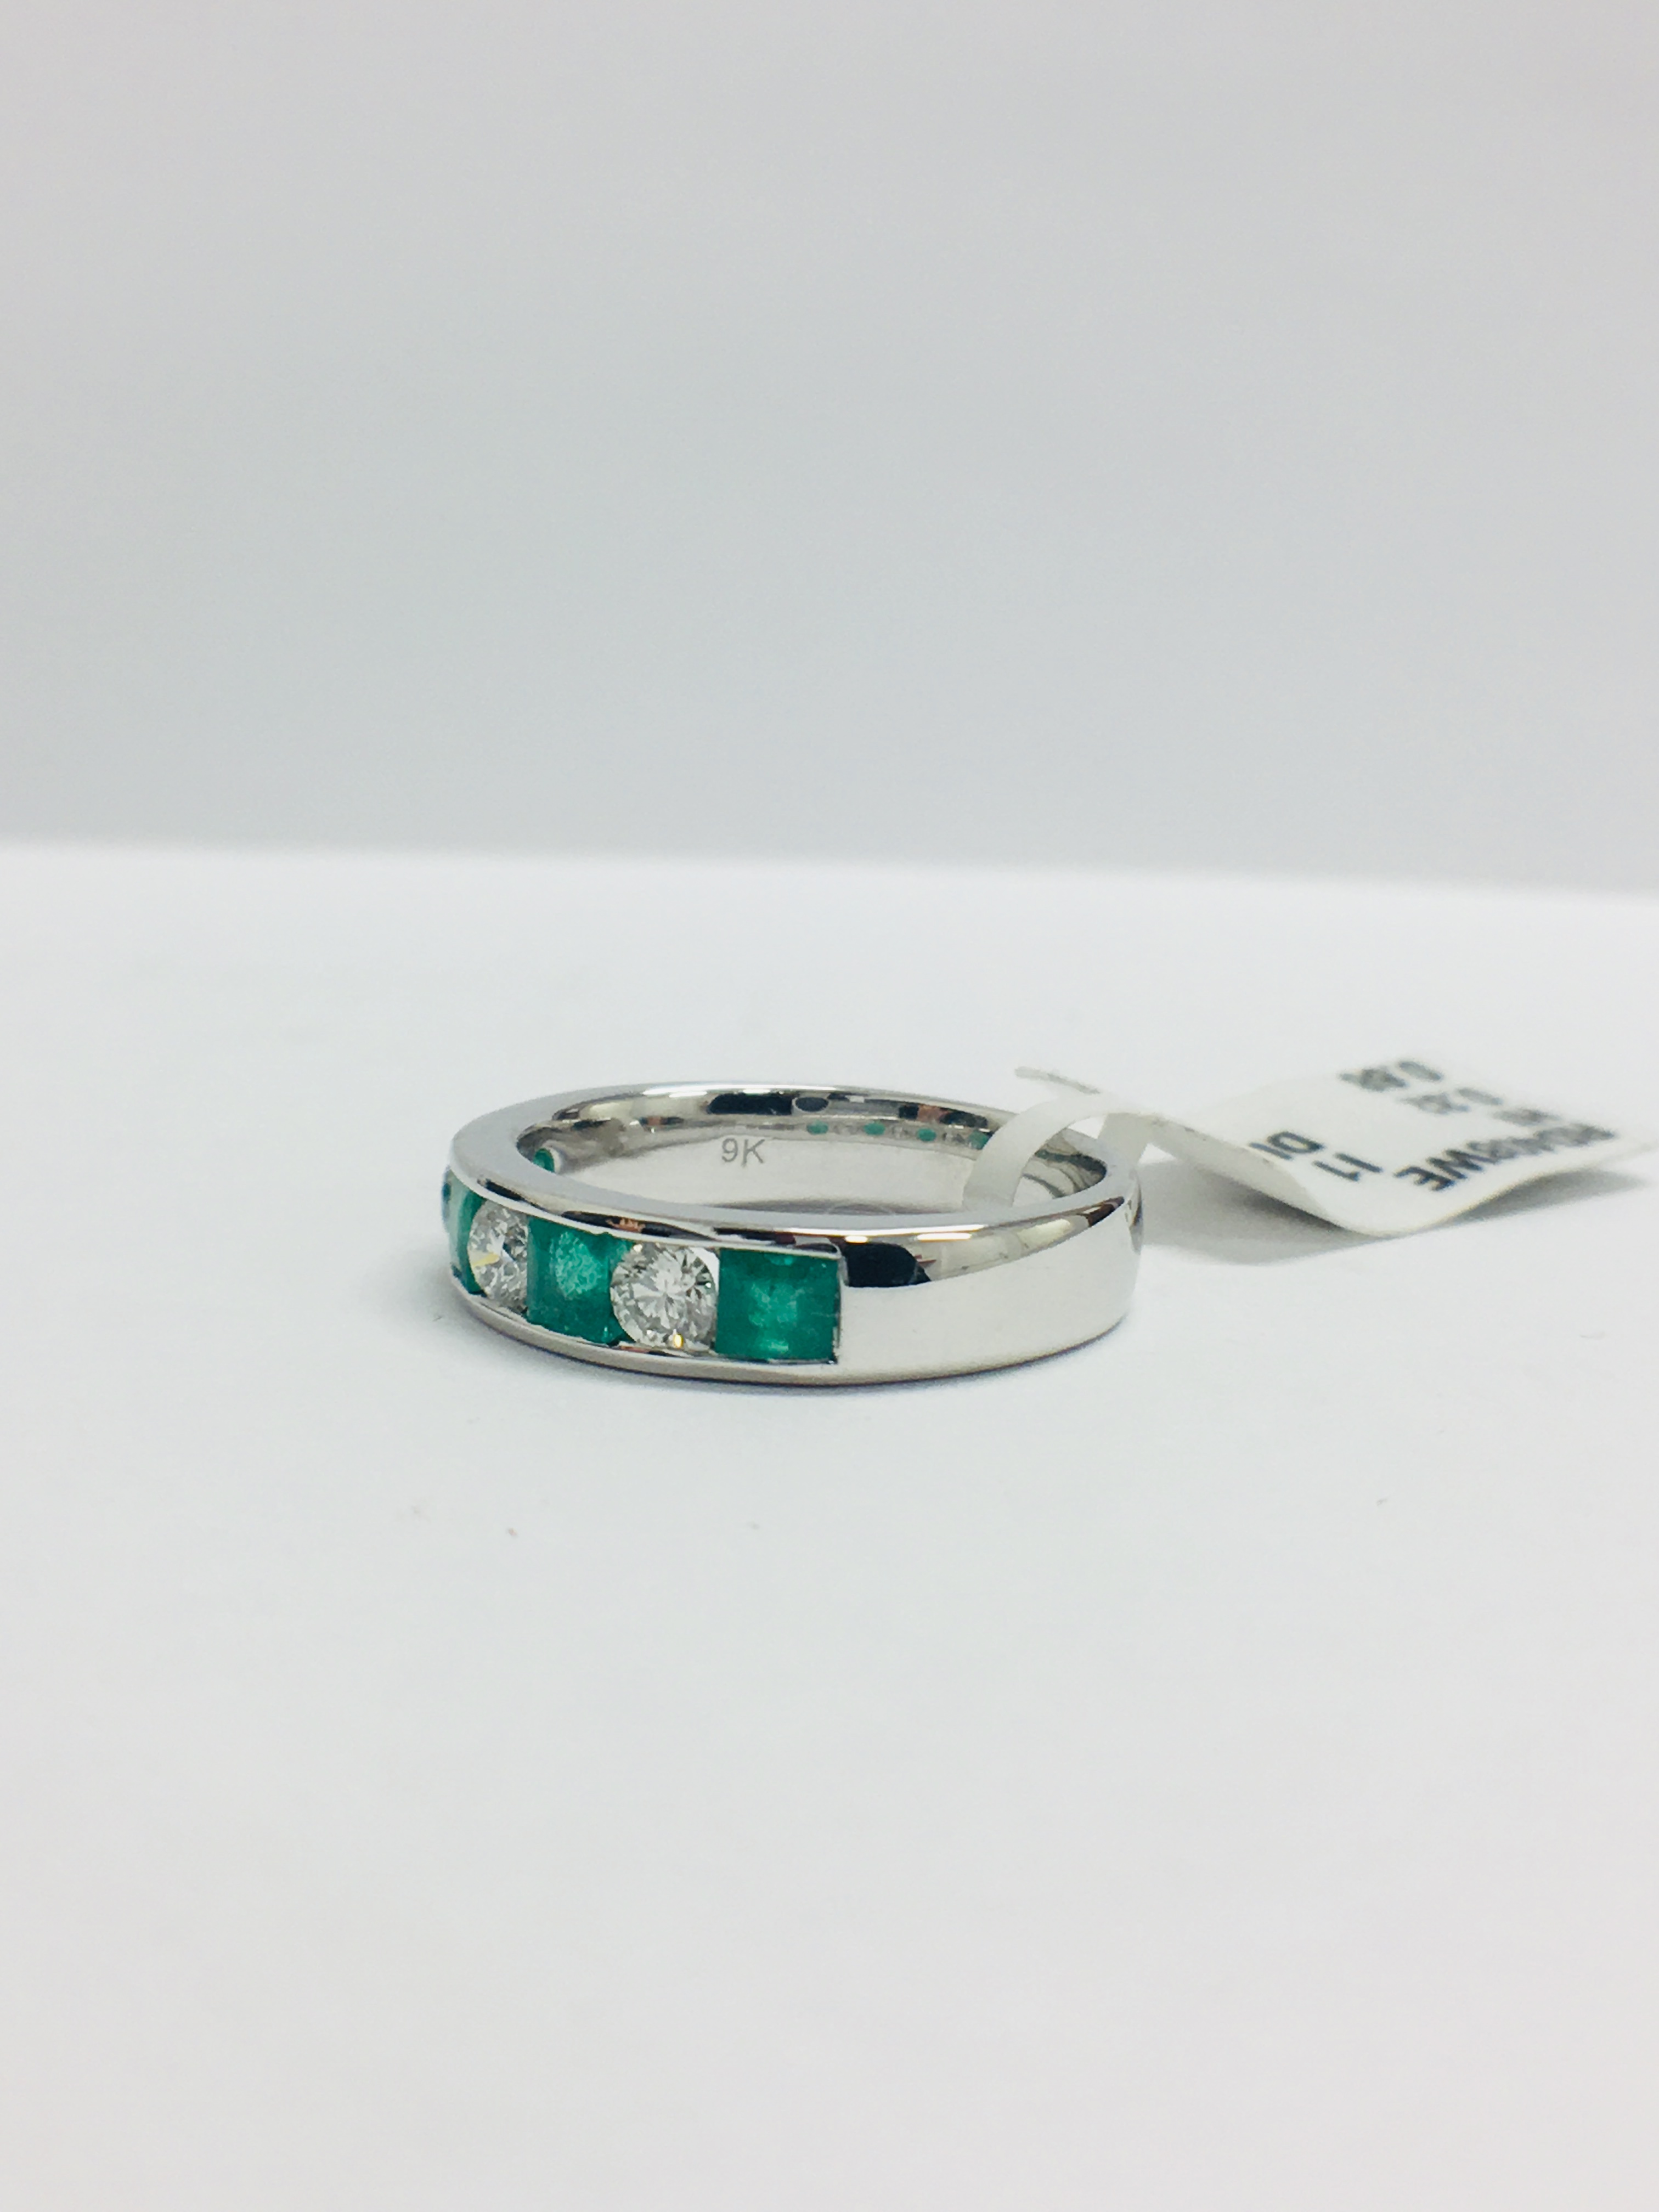 9Ct White Gold Emerald Diamond Channel Set Ring, - Image 3 of 13